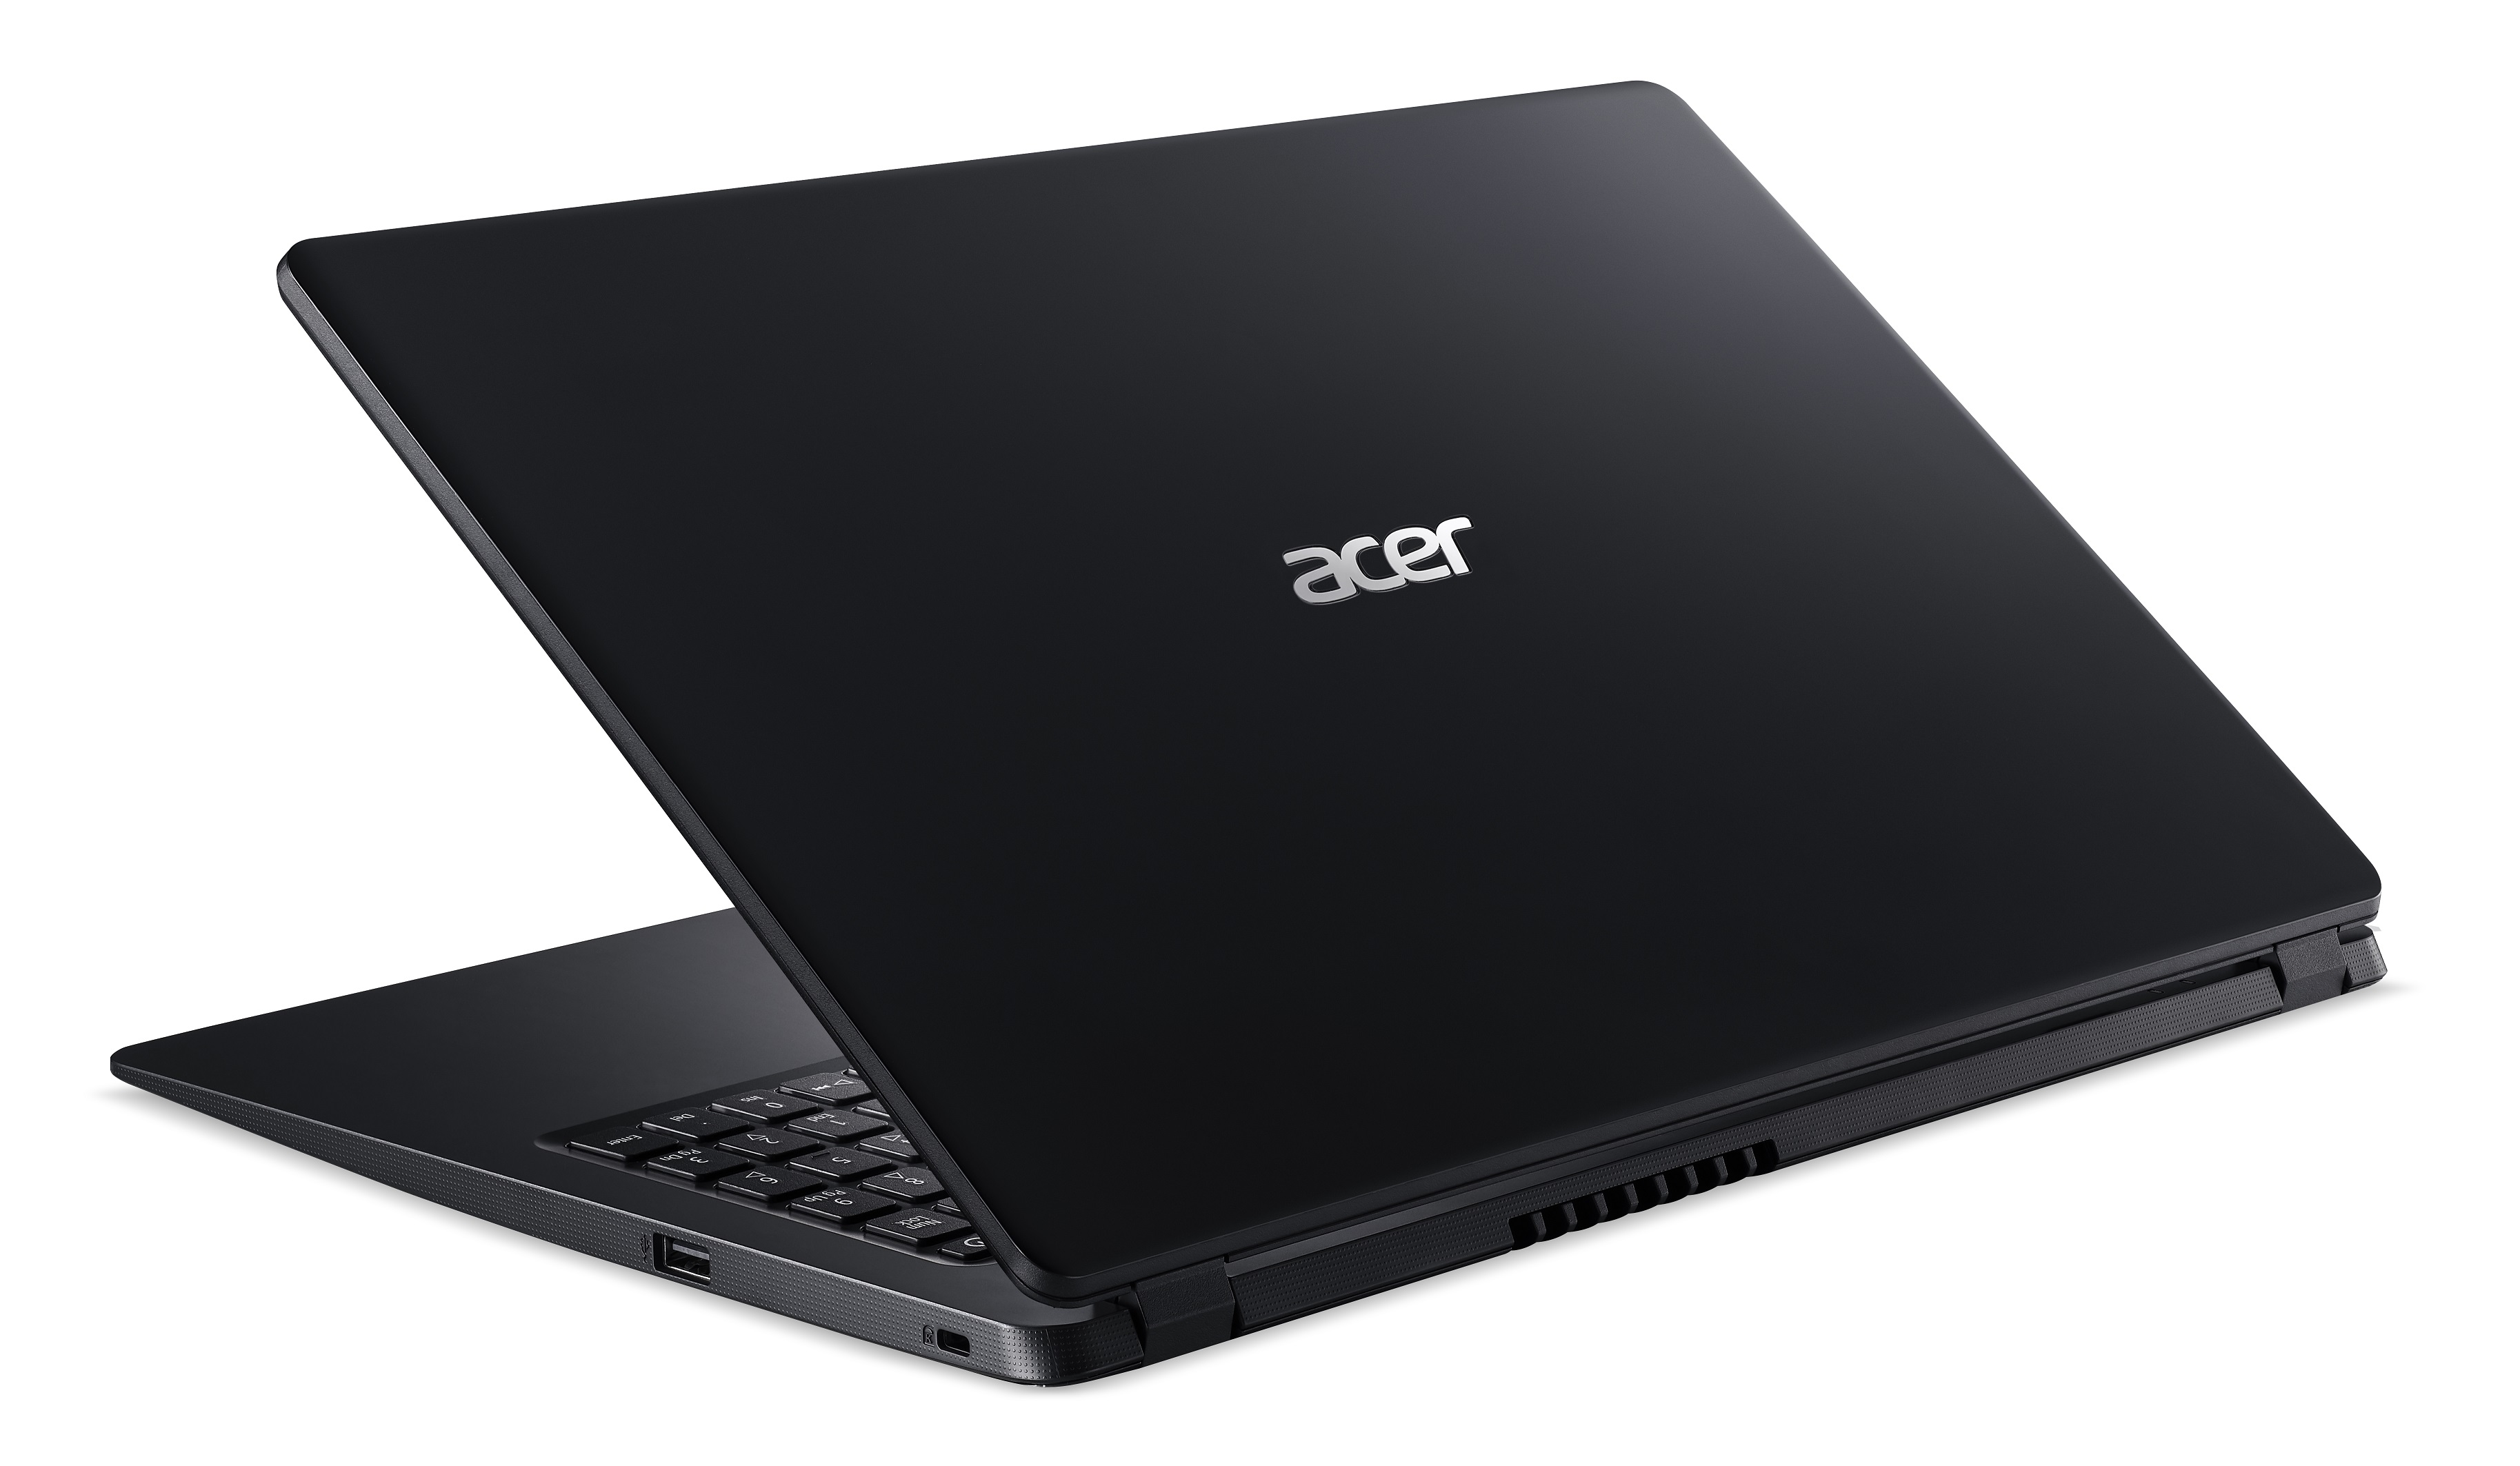 Acer launches first of the Fully loaded affordable Extensa series with 10th Gen Intel® Core™ processor decoding=